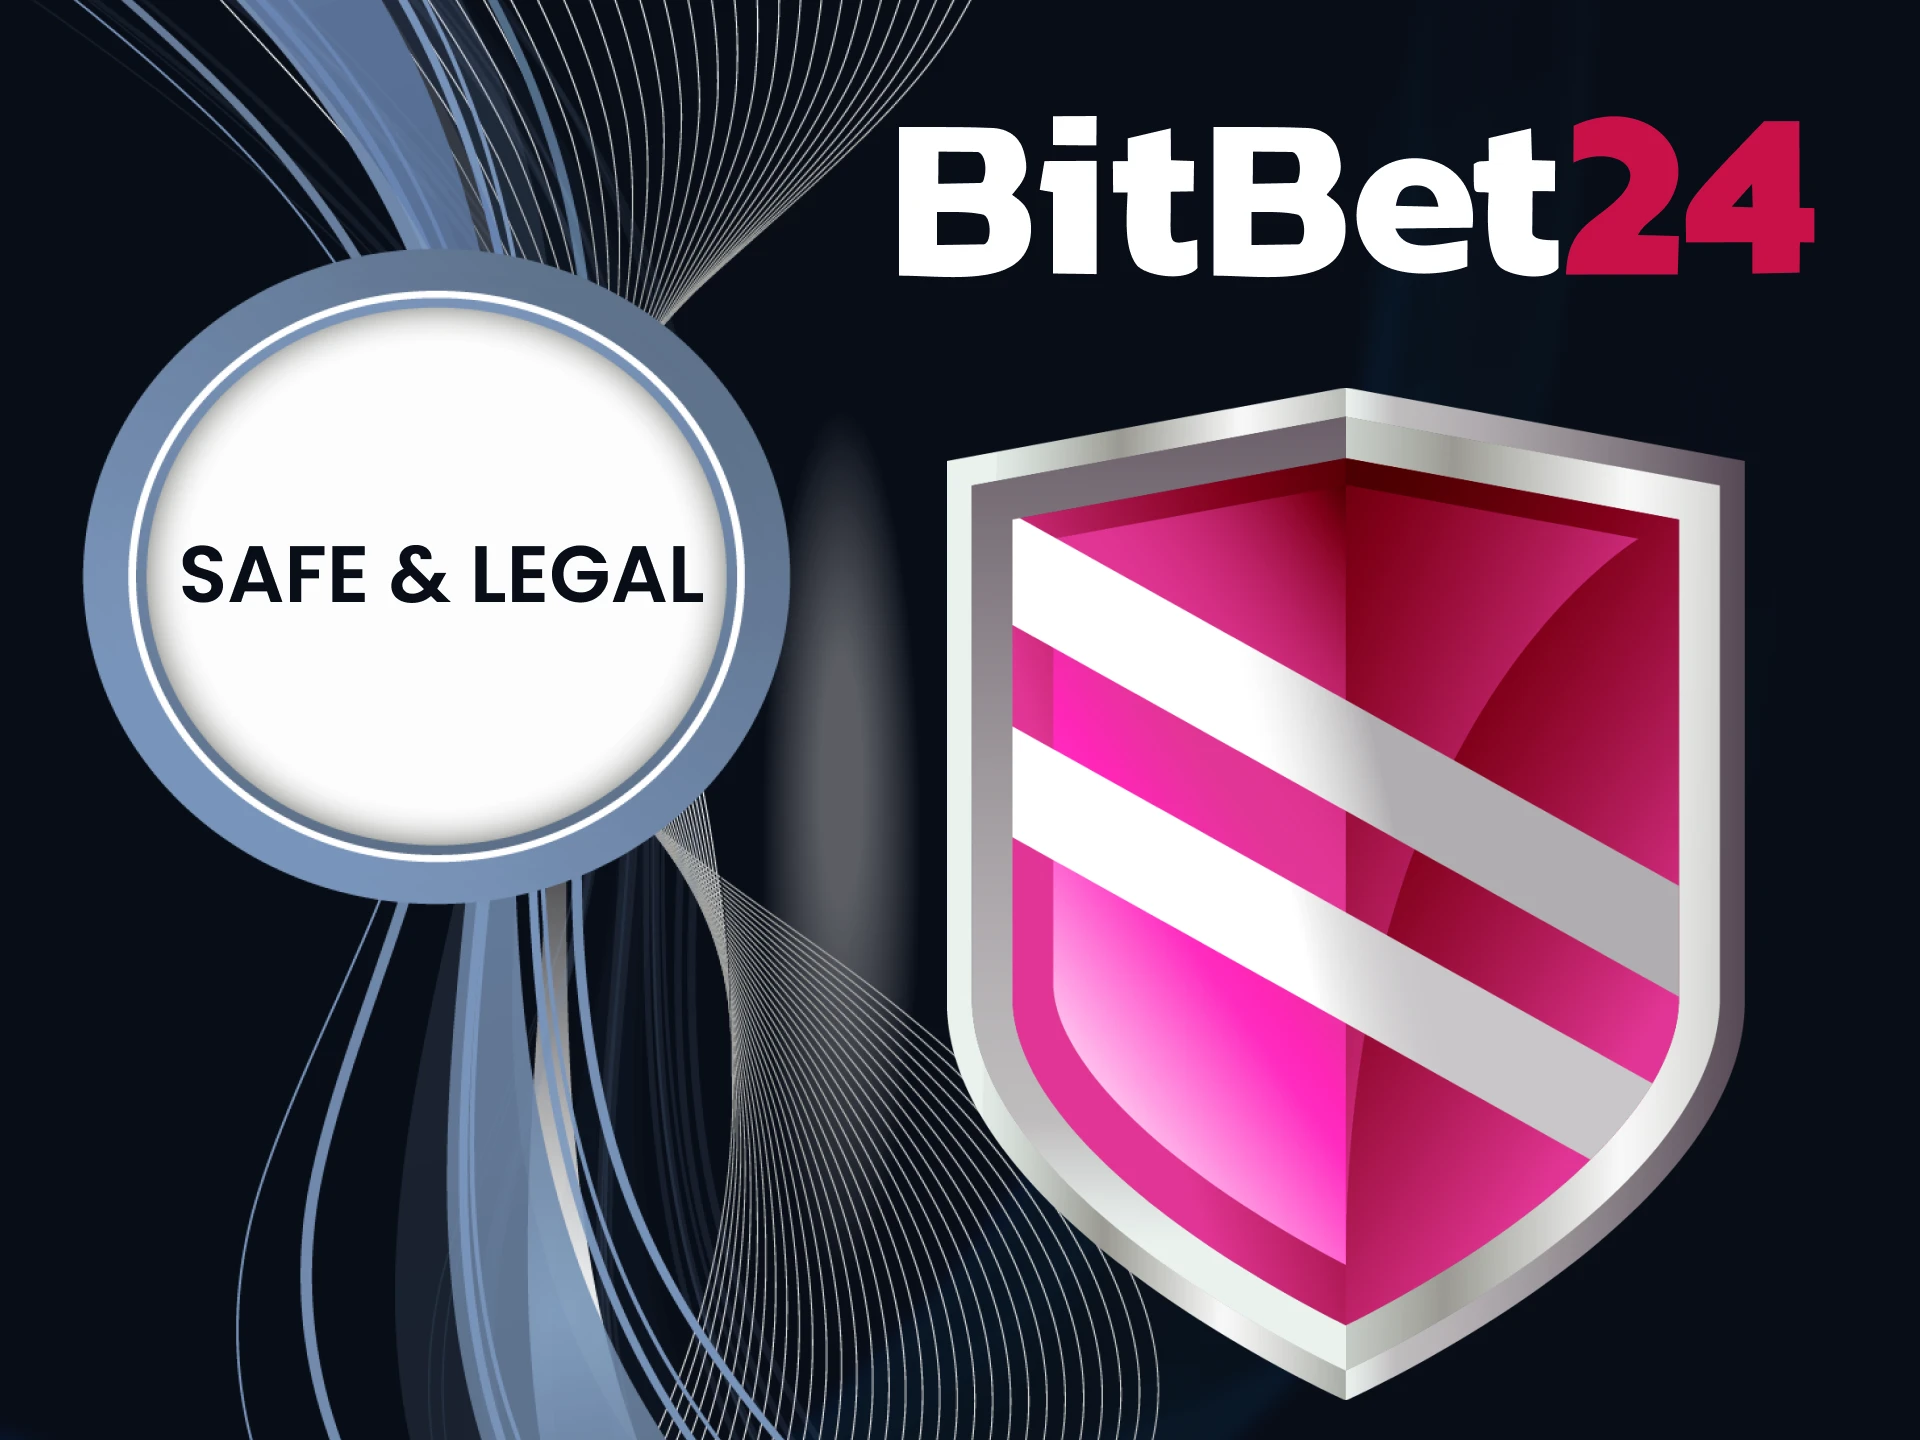 BitBet24 is legal and safe for players.